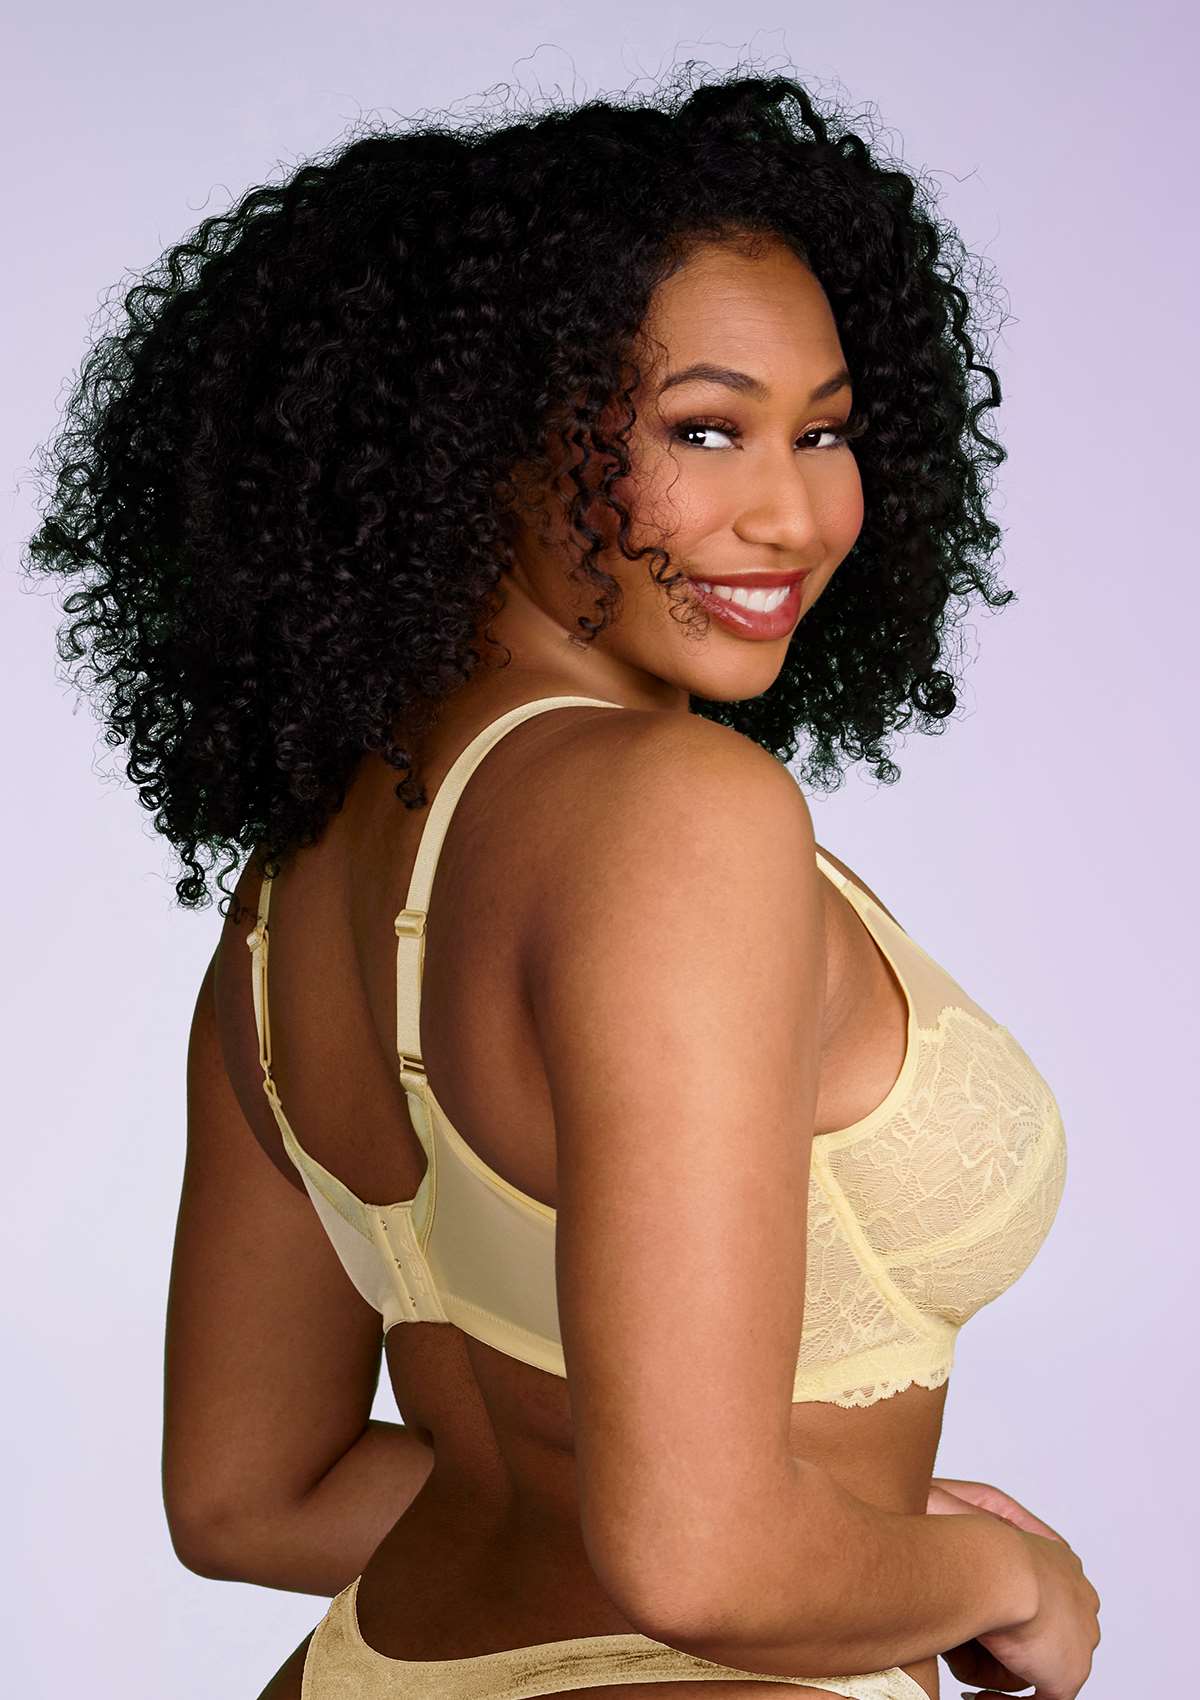 HSIA Blossom Full Coverage Side Support Bra: Designed For Heavy Busts - Light Yellow / 40 / H